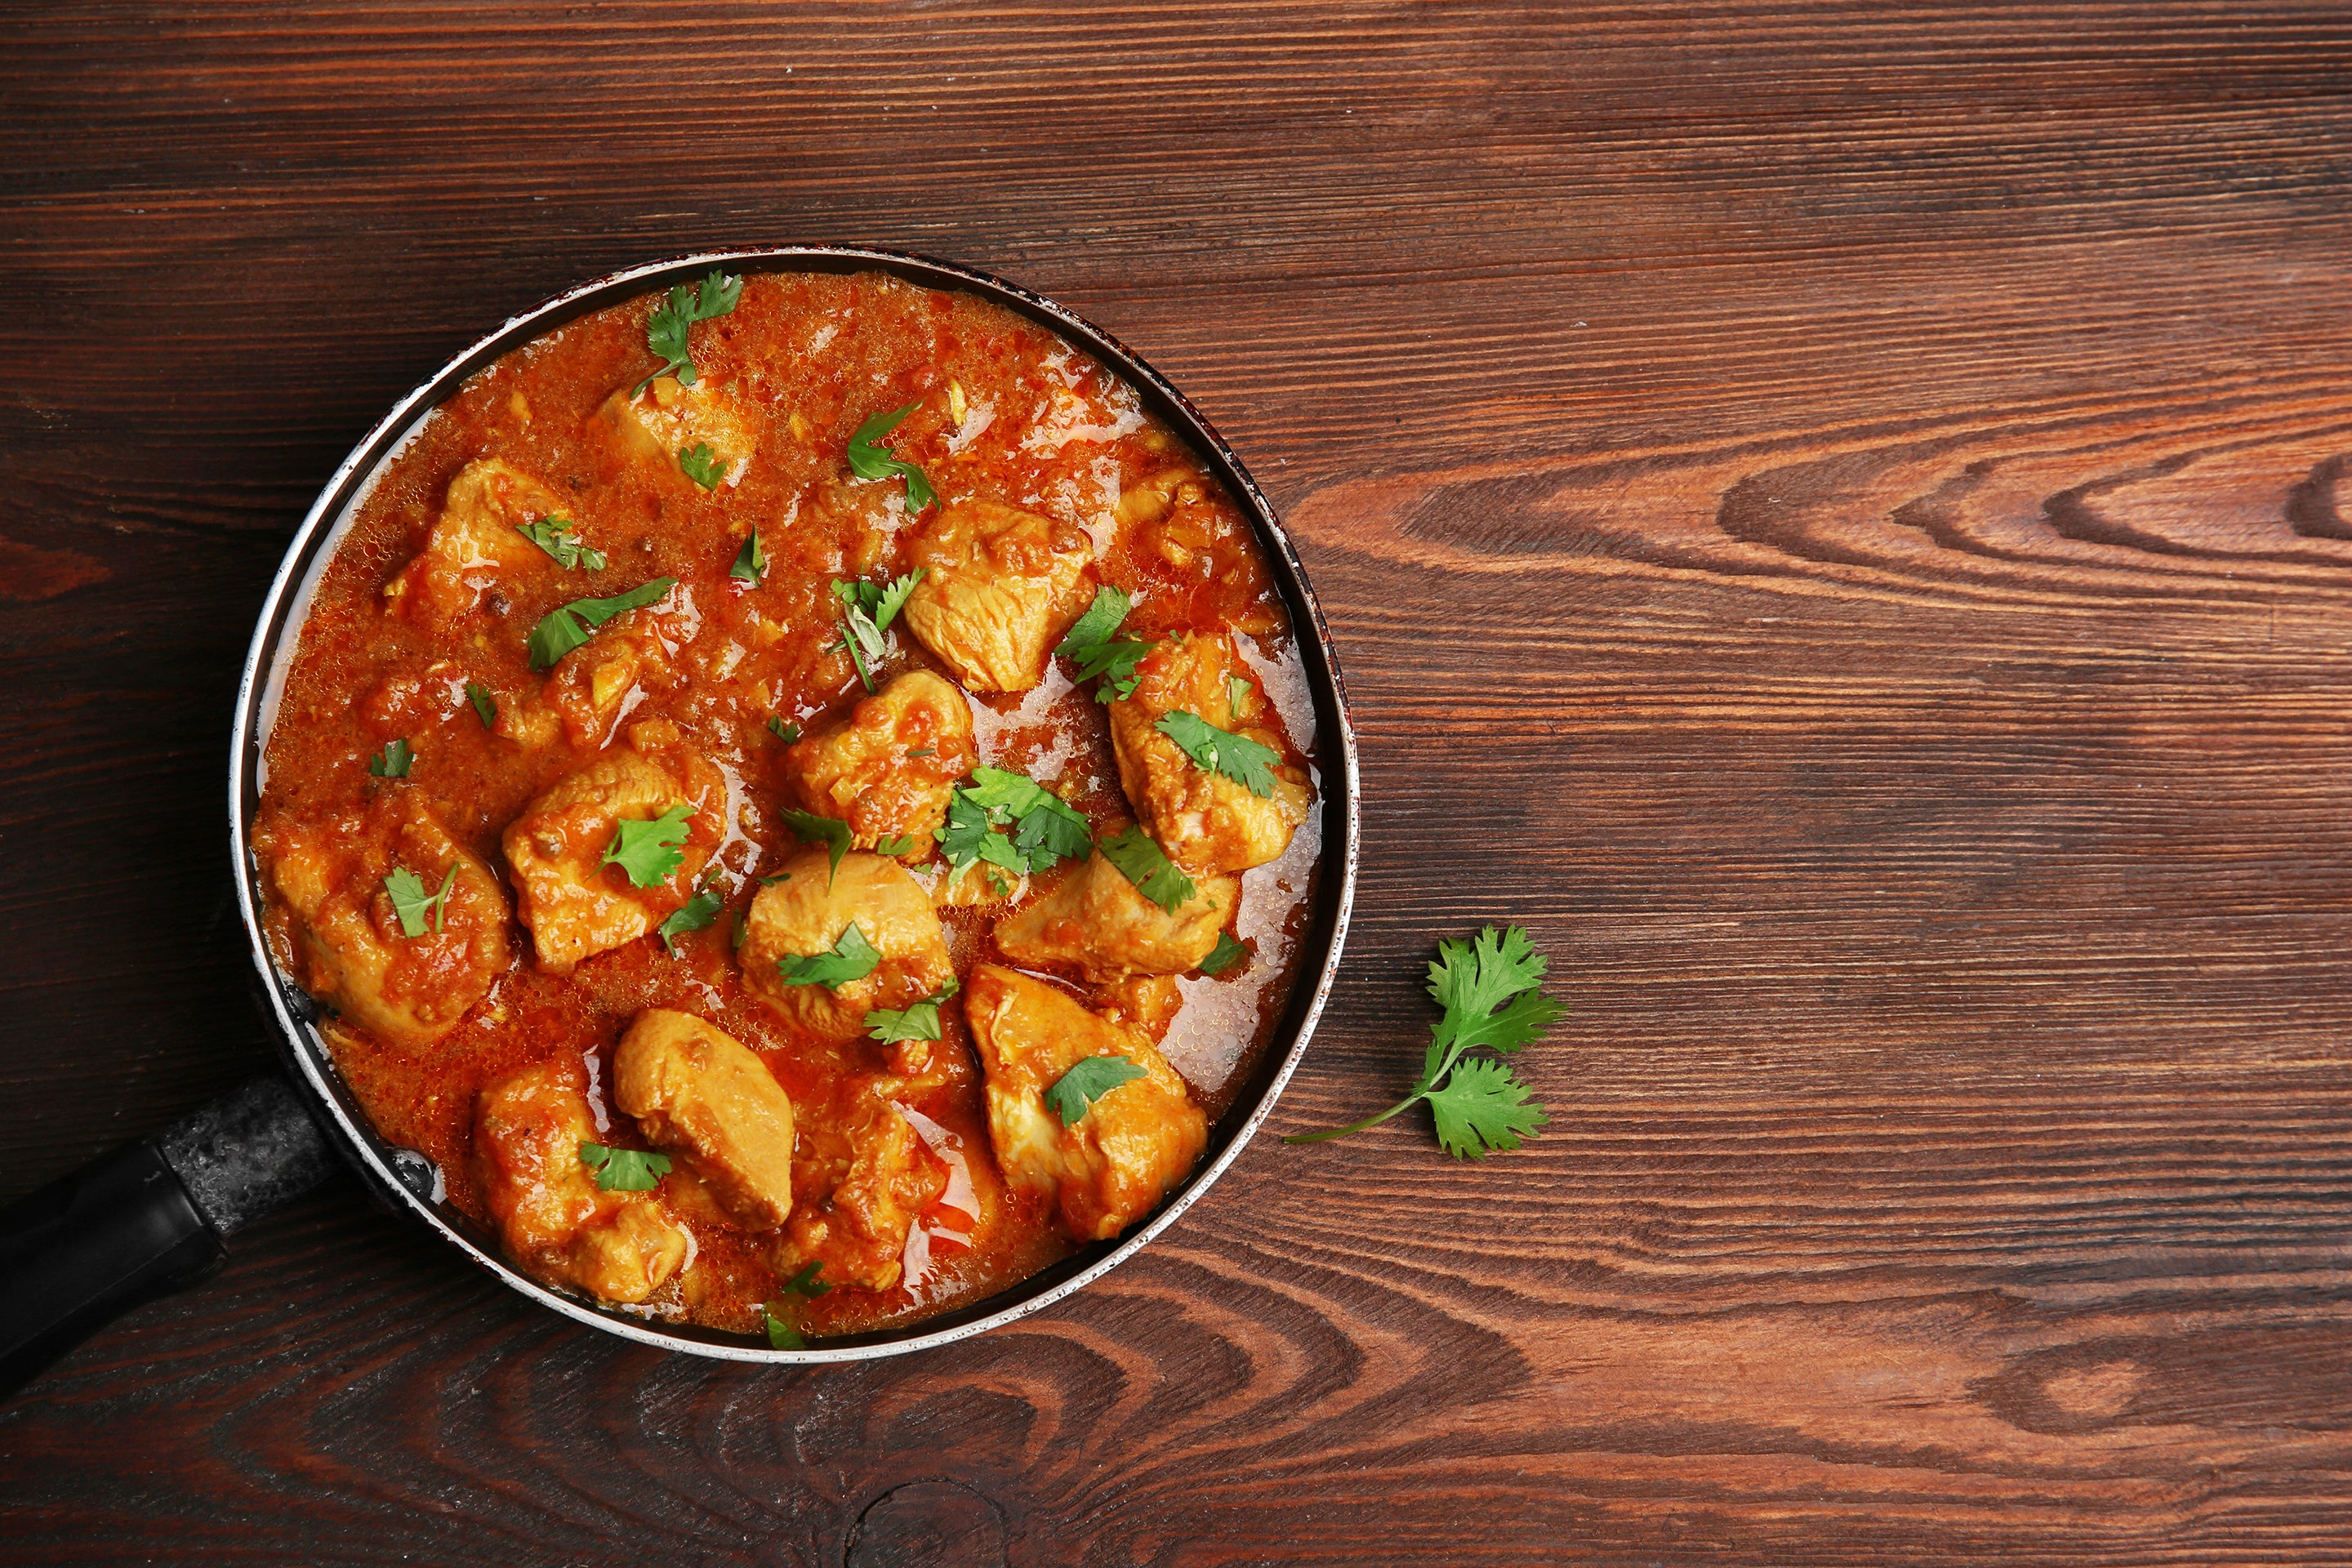 Indian Curry is made with a variety of spices, including turmeric, cumin, and coriander.